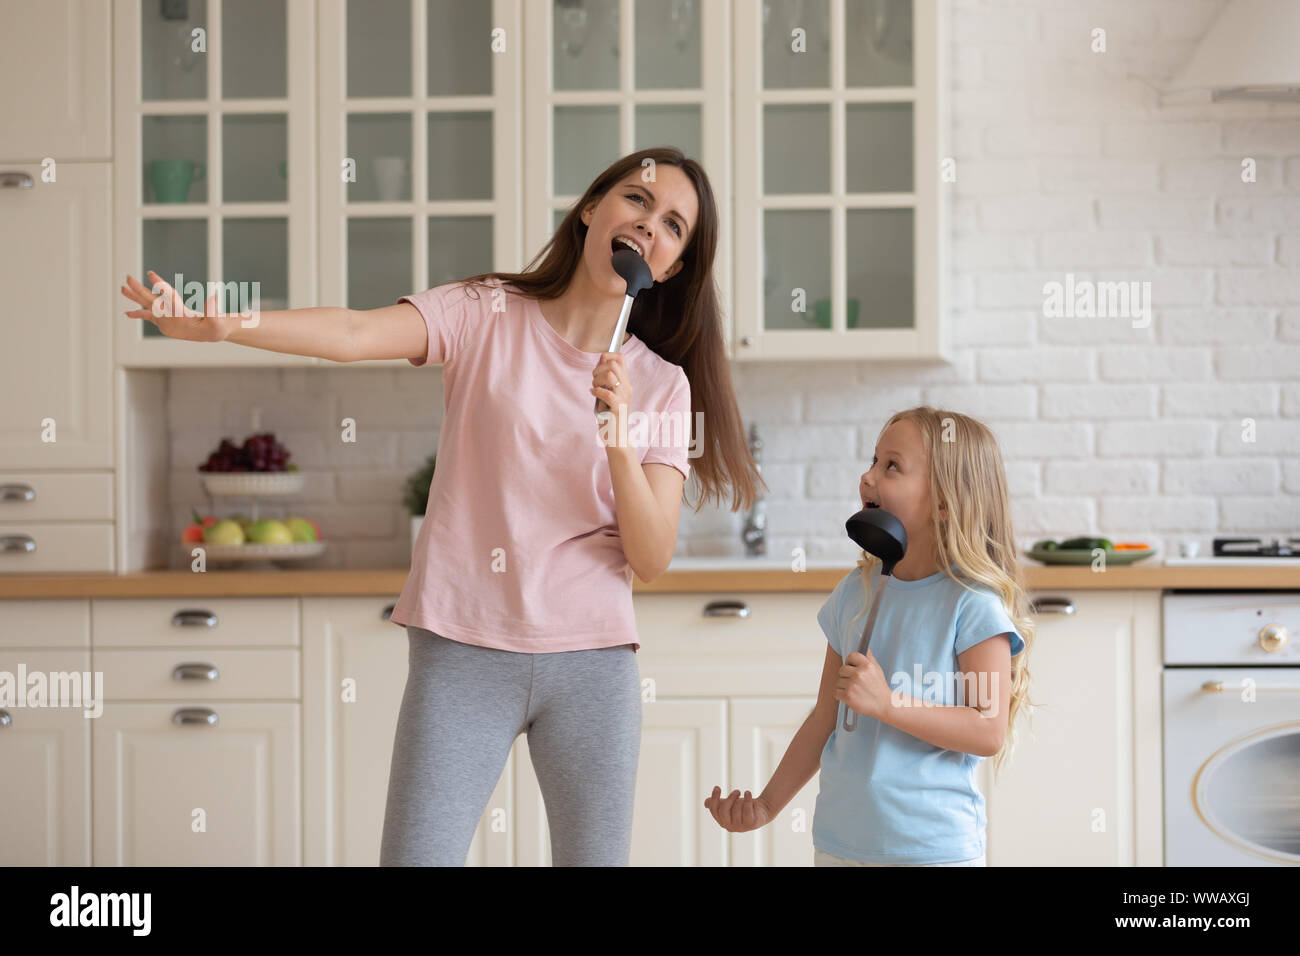 Single mommy with little preschool daughter singing in soup ladles. Stock Photo